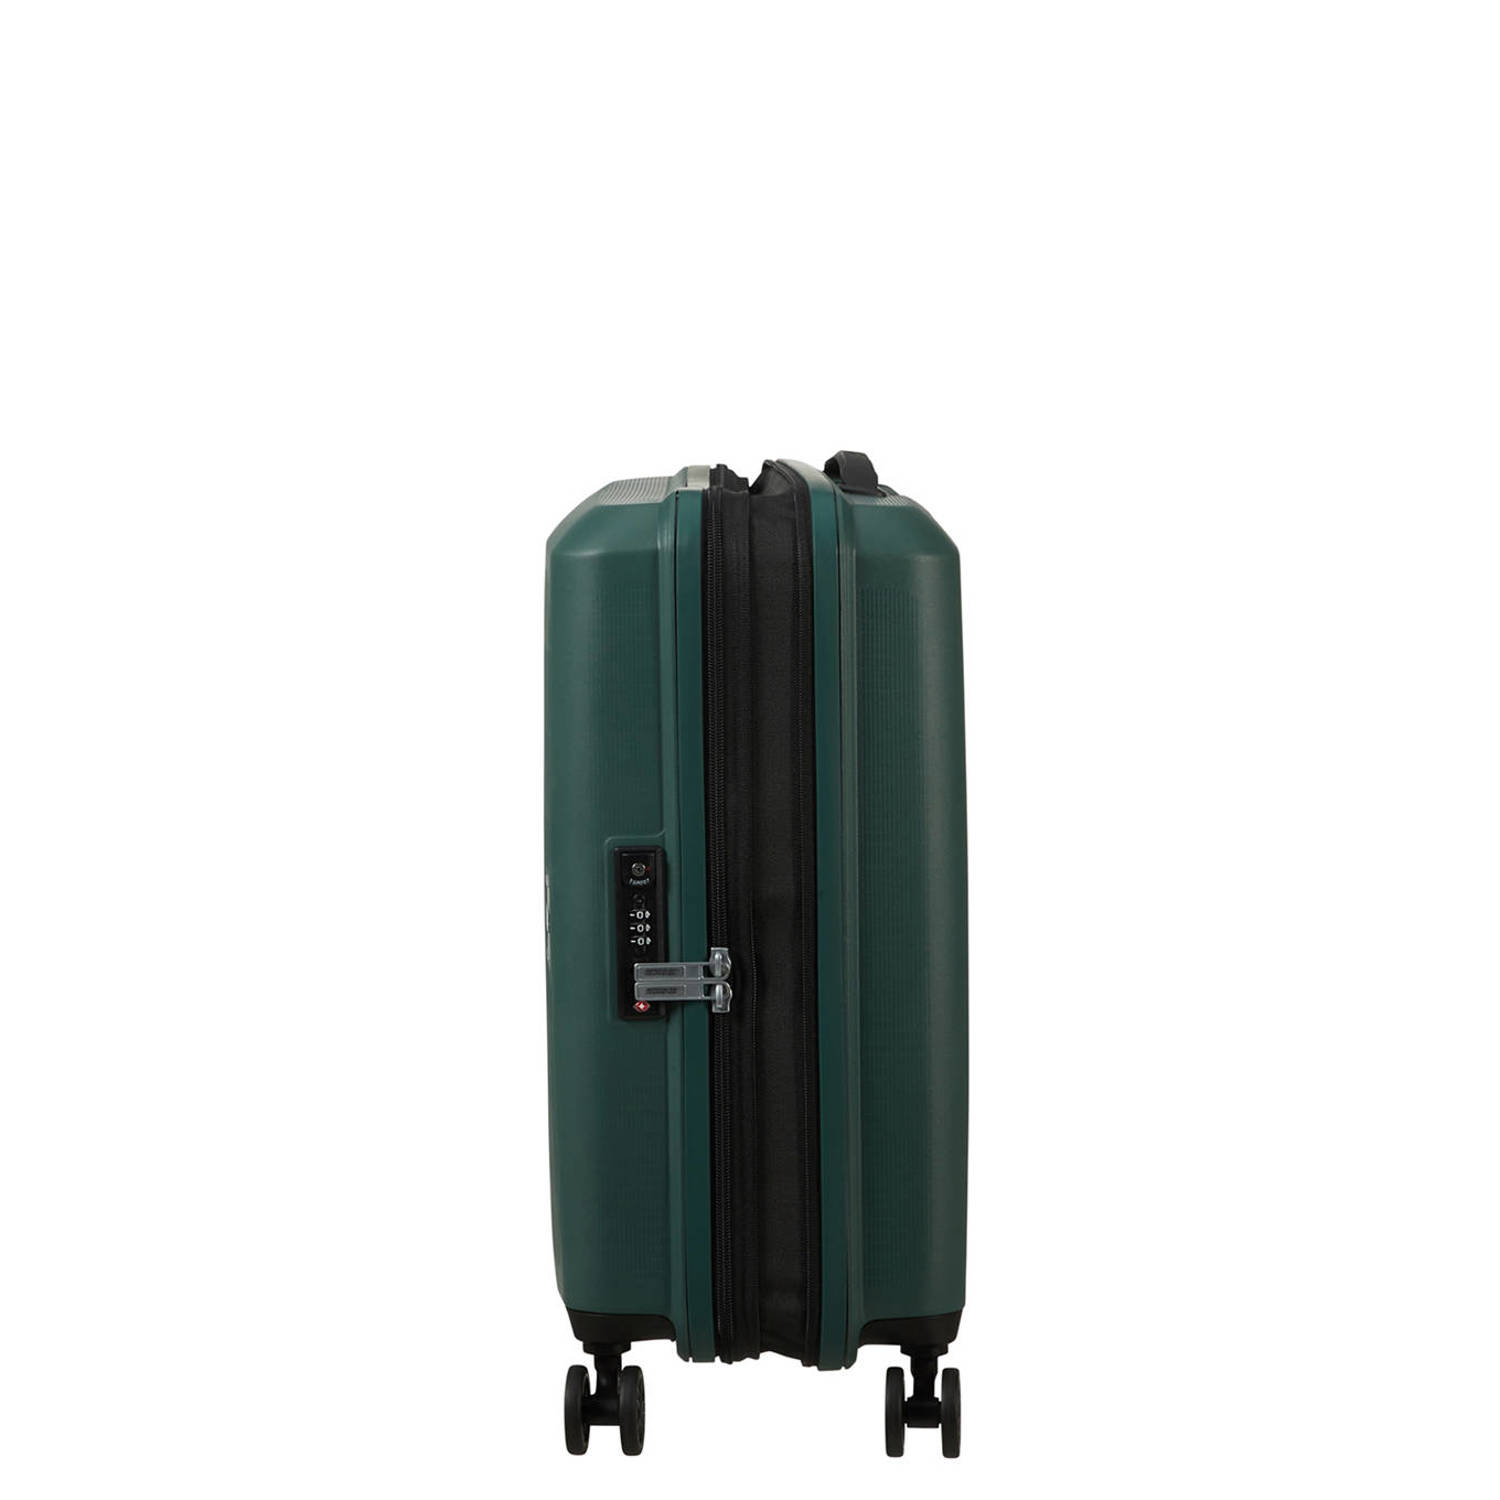 American Tourister trolley Aerostep 55 cm. Expandable donkergroen